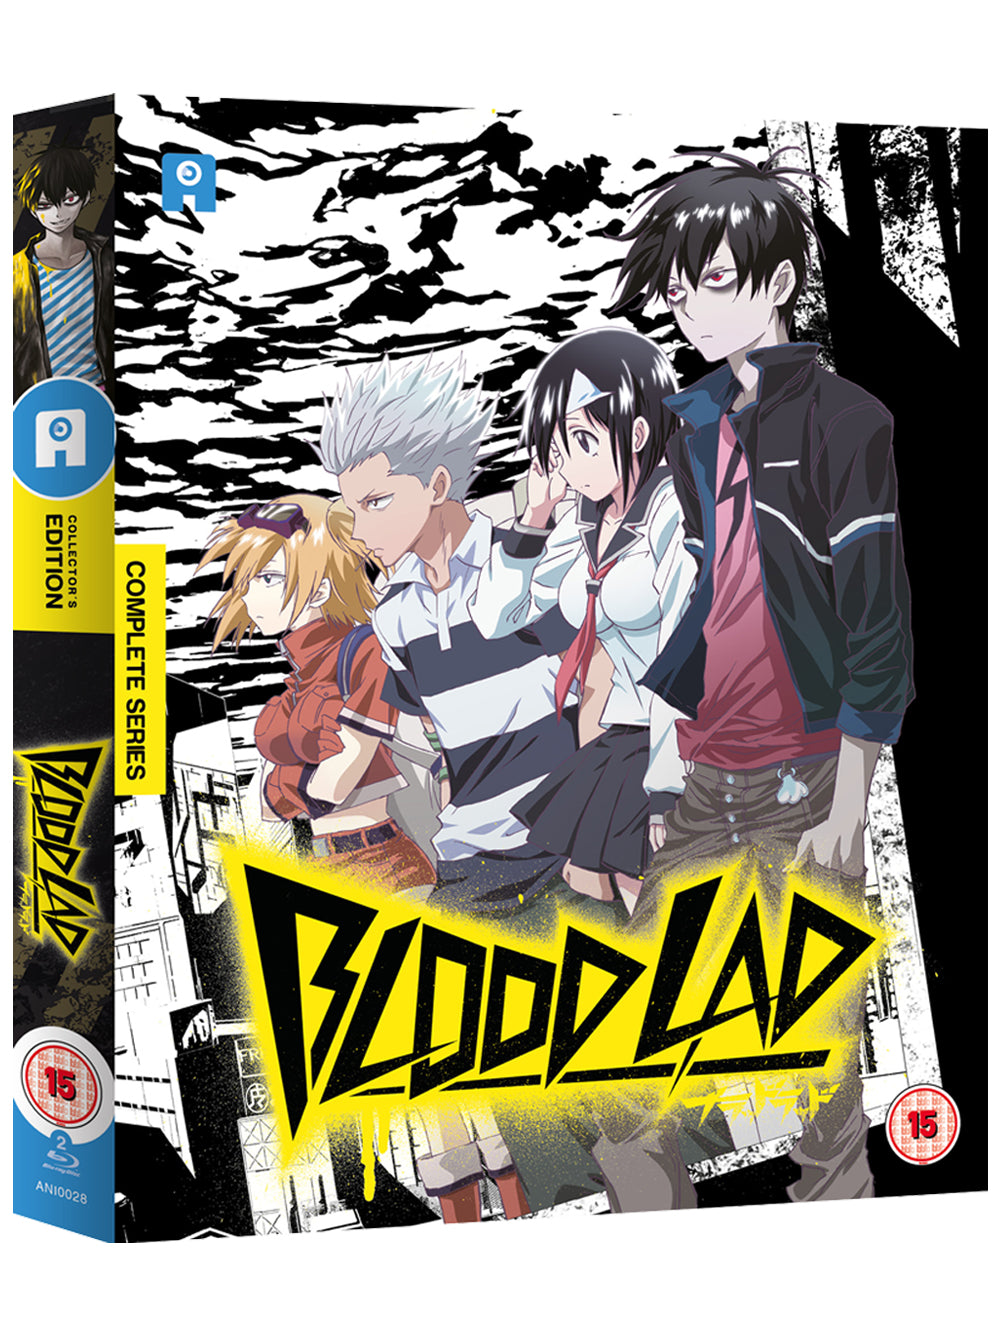 BLOOD LAD - Official Trailer - Available on DVD and Blu-ray 9/2/2014 